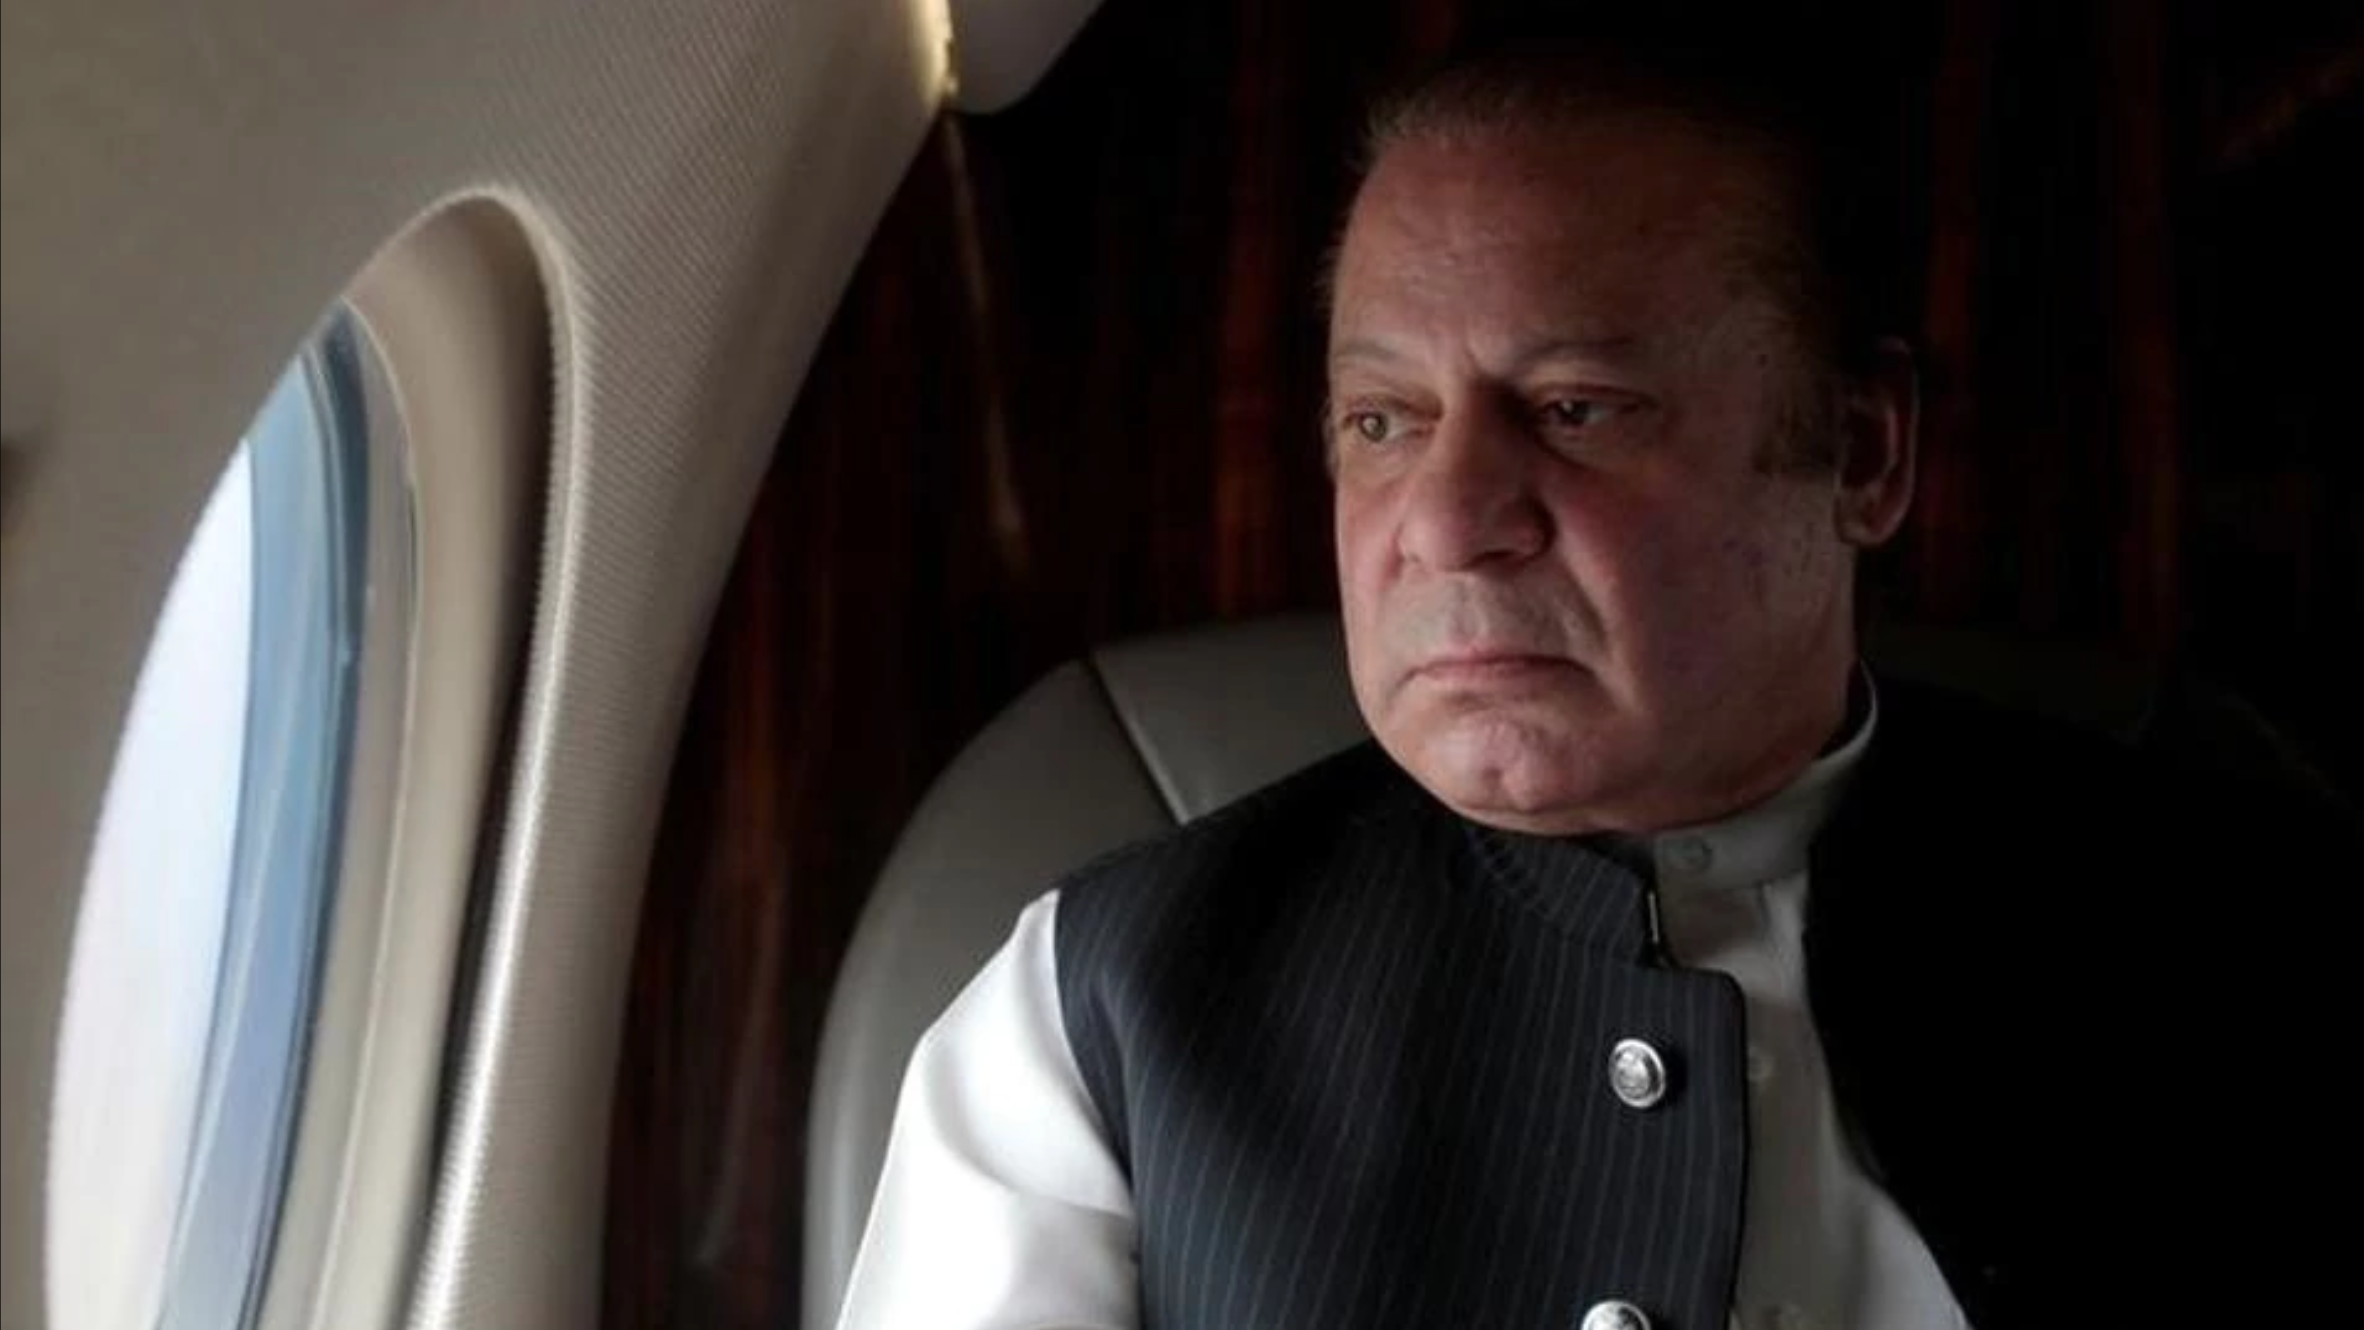 Pakistan’s ousted prime minister Nawaz Sharif is expected to be formally charged today